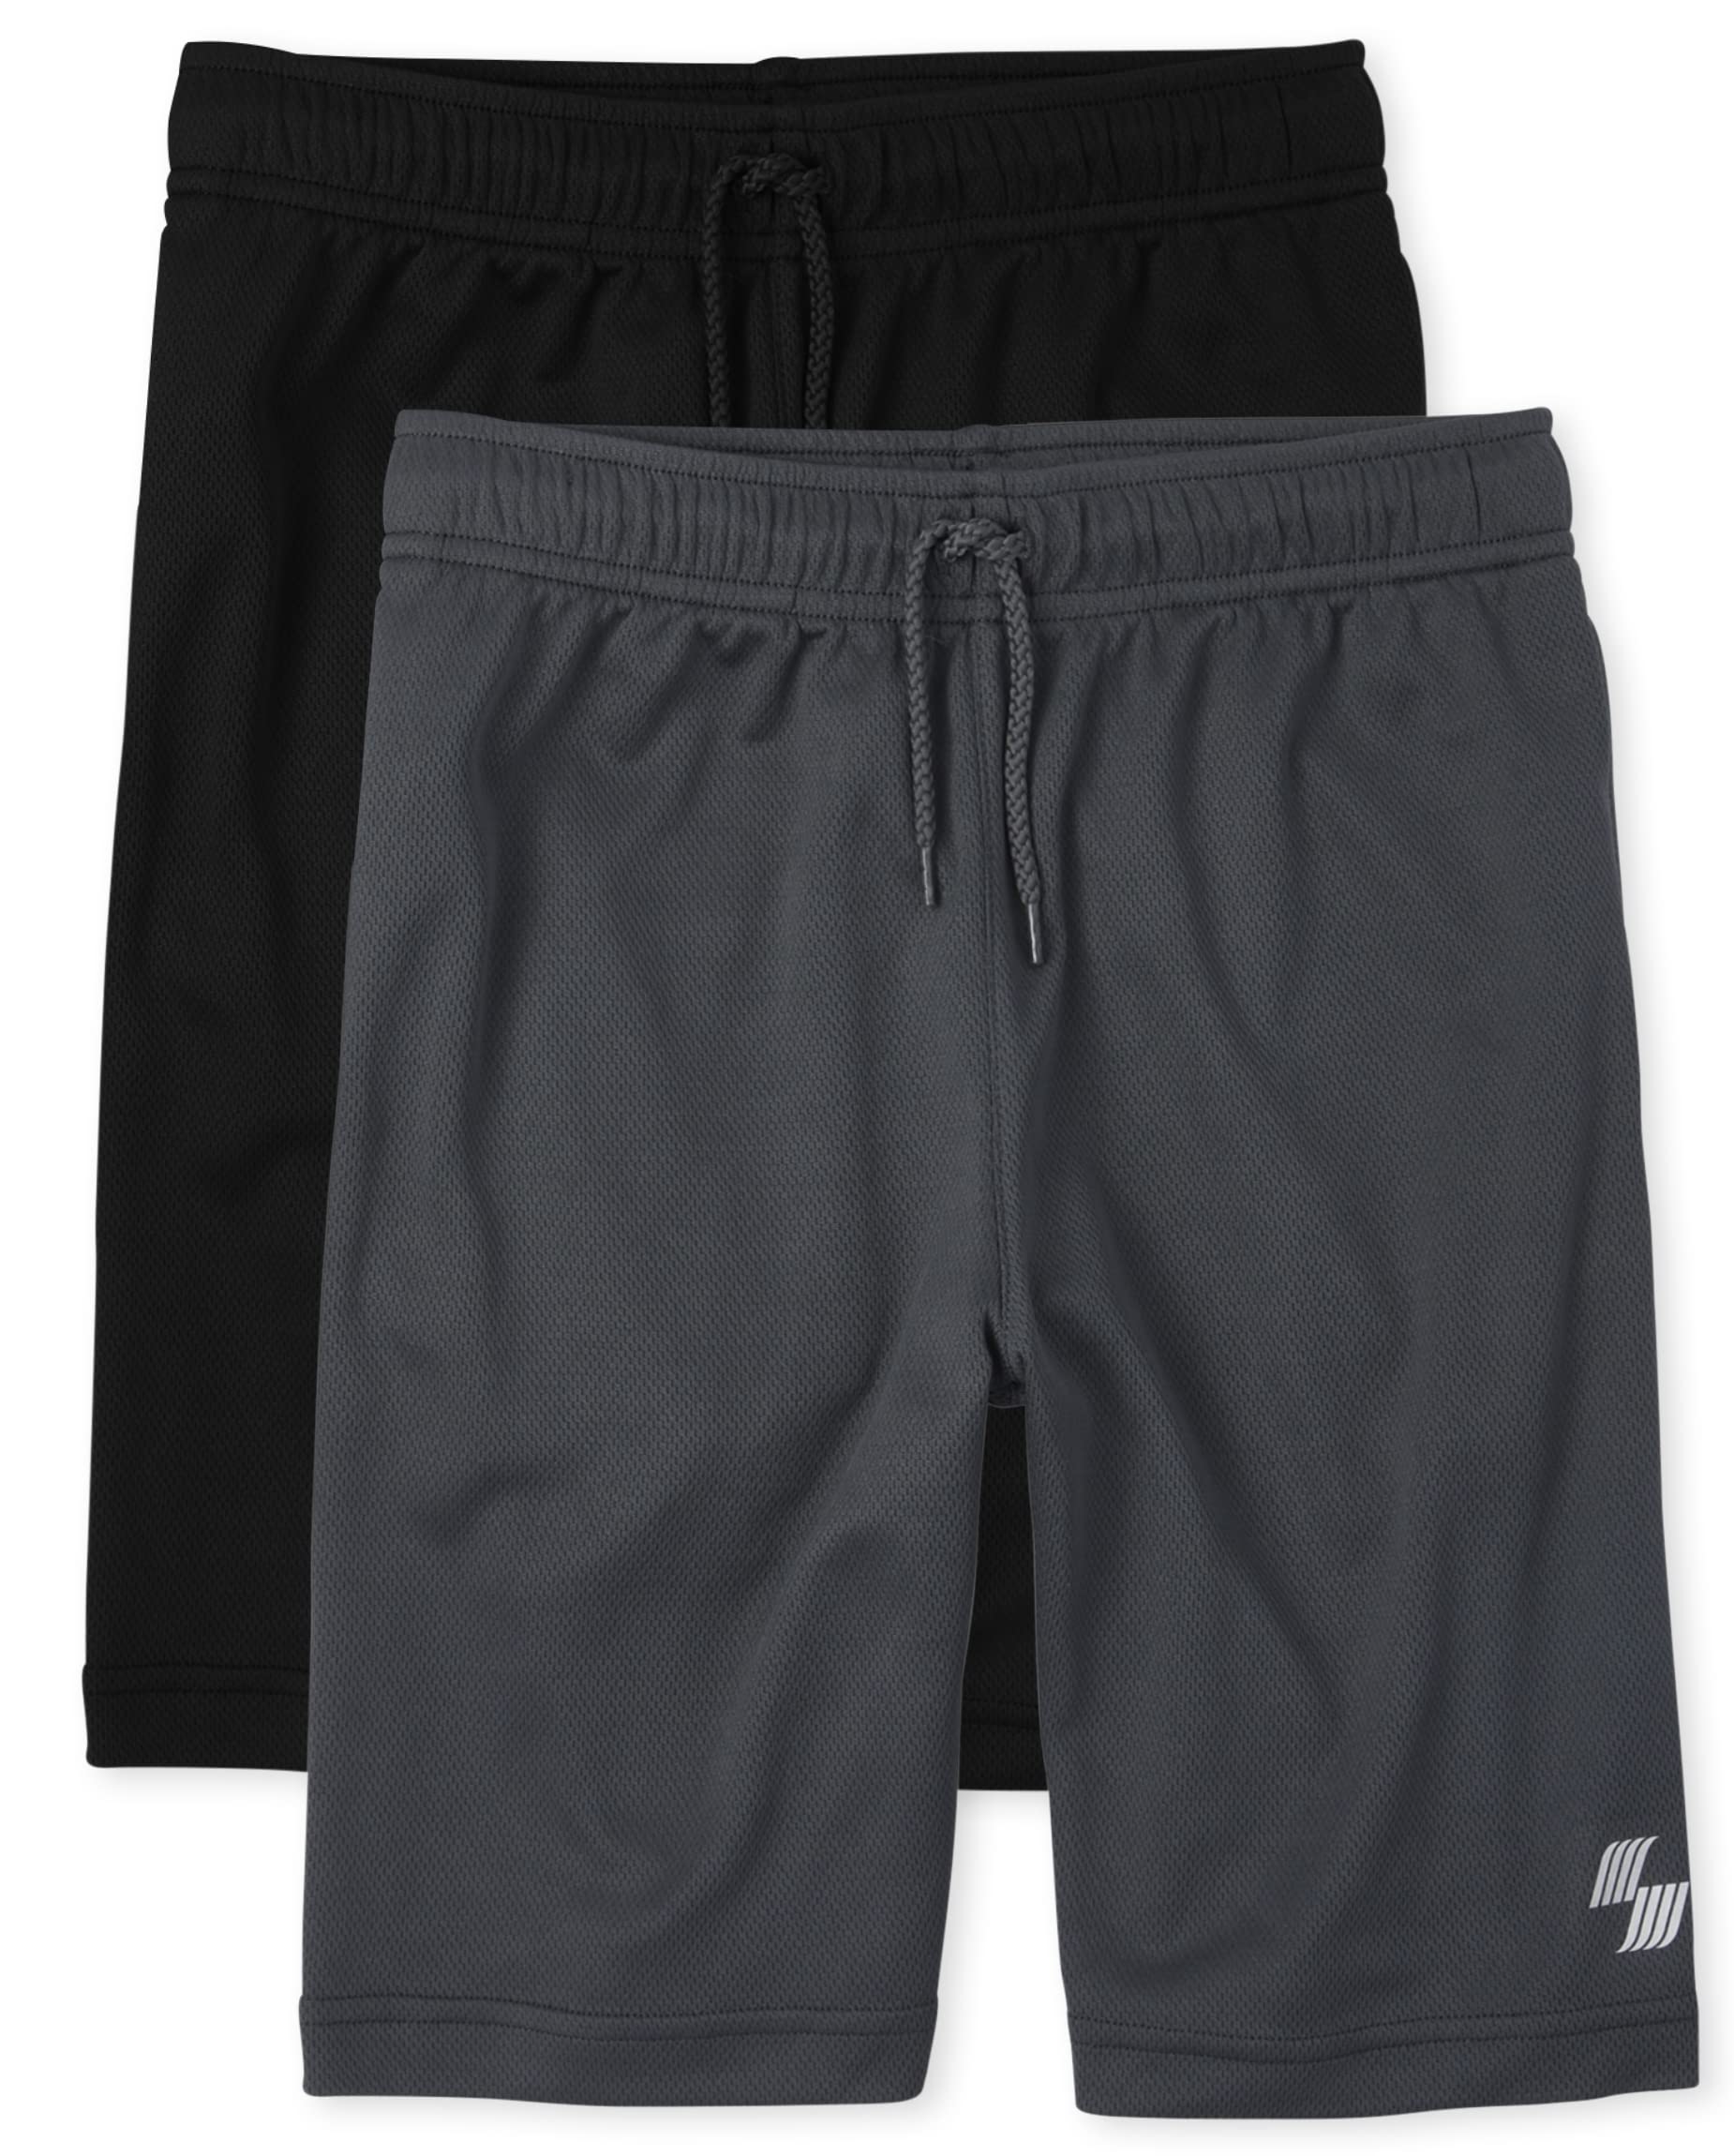 The Children's Place Boys' 2 Pack Mesh Performance Basketball Shorts